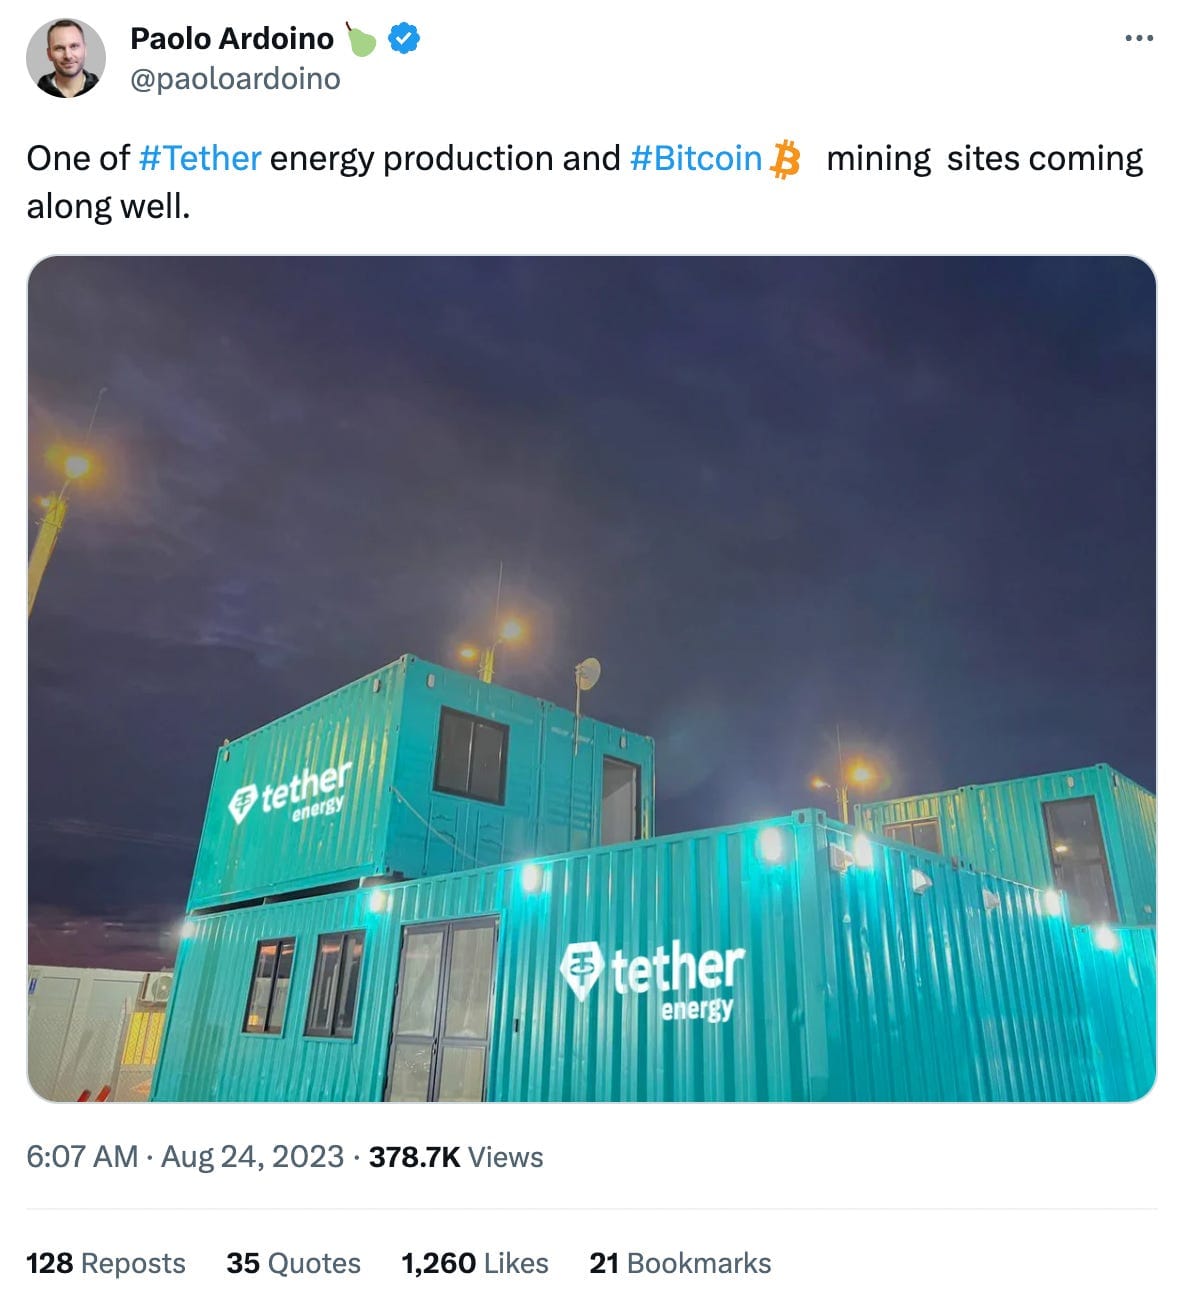 Tweet by Paolo Ardoino: "One of #Tether energy production and #Bitcoin mining sites coming along well." The tweet includes a photo of a green building appeared to be made from a shipping container, with the Tether logo amateurishly photoshopped on the side.